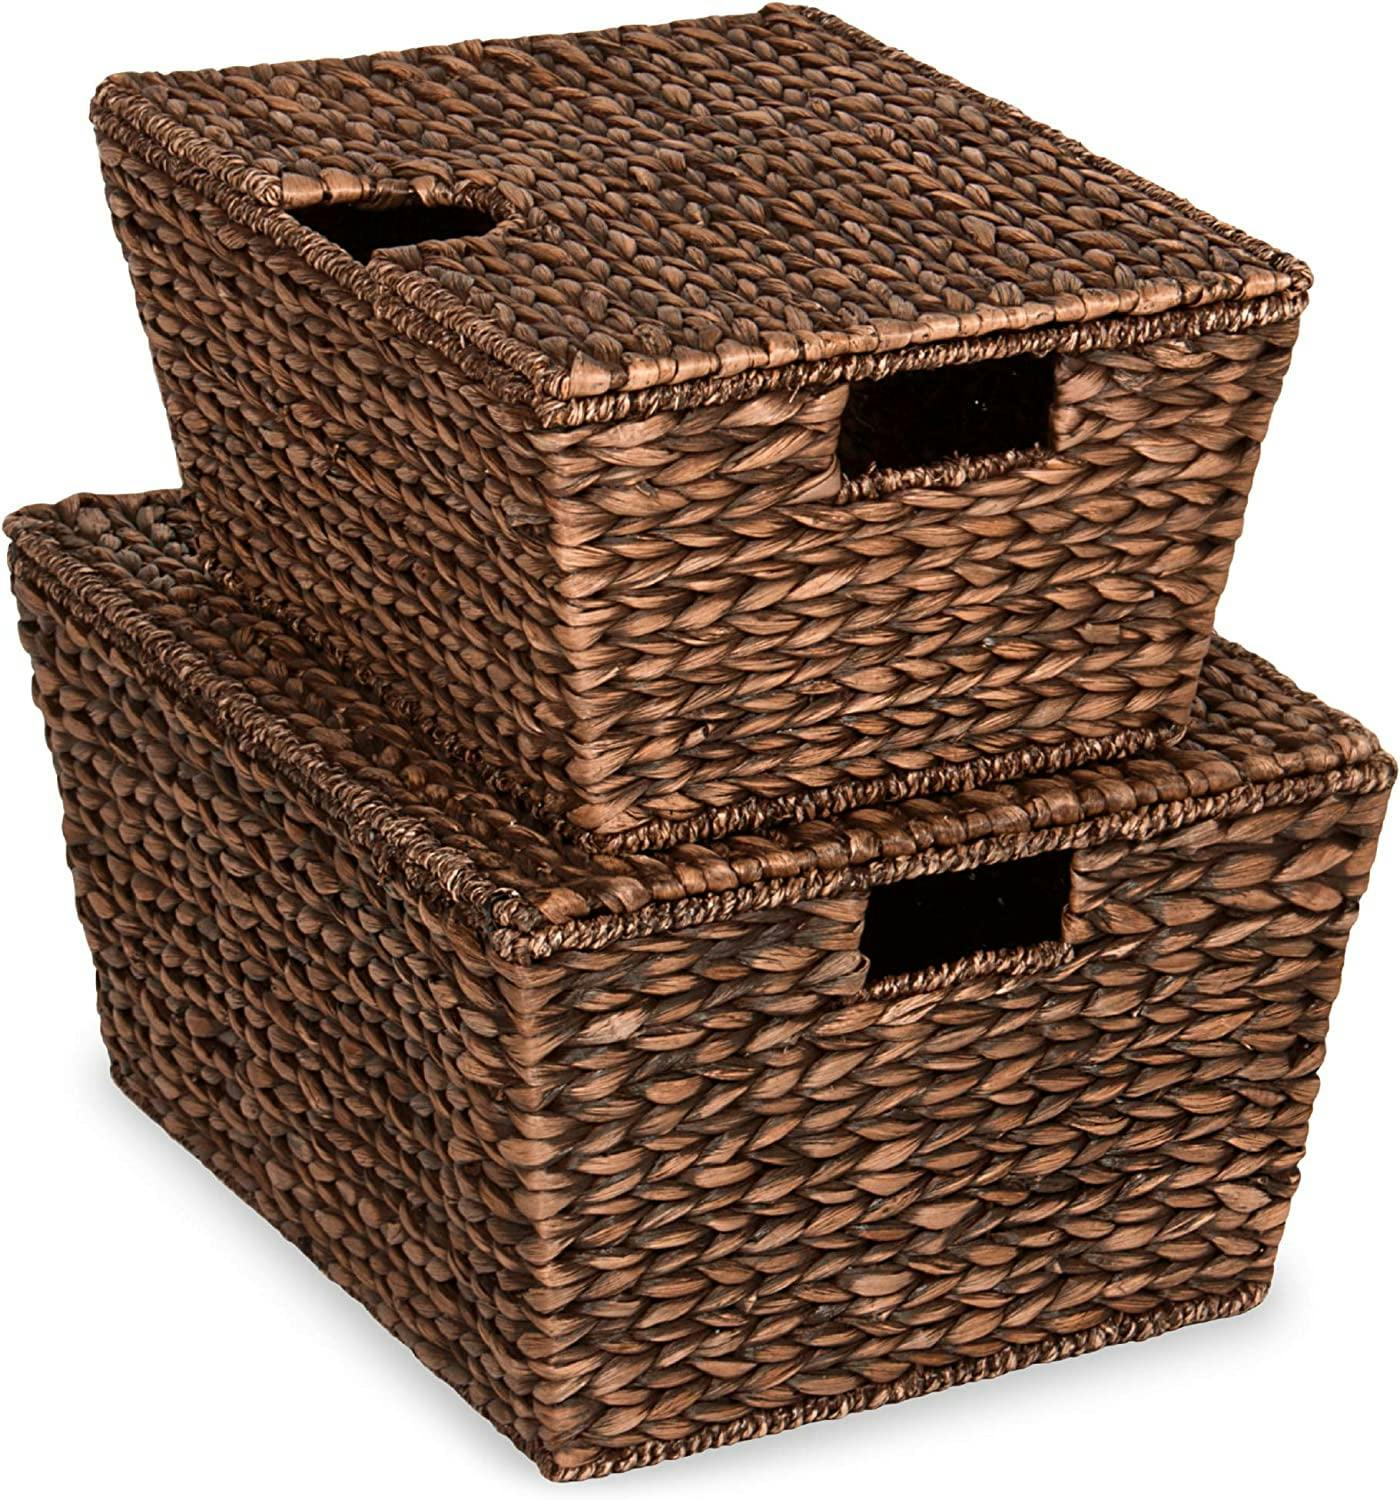 XL Handwoven Water Hyacinth Storage Baskets with Lids, Set of 2